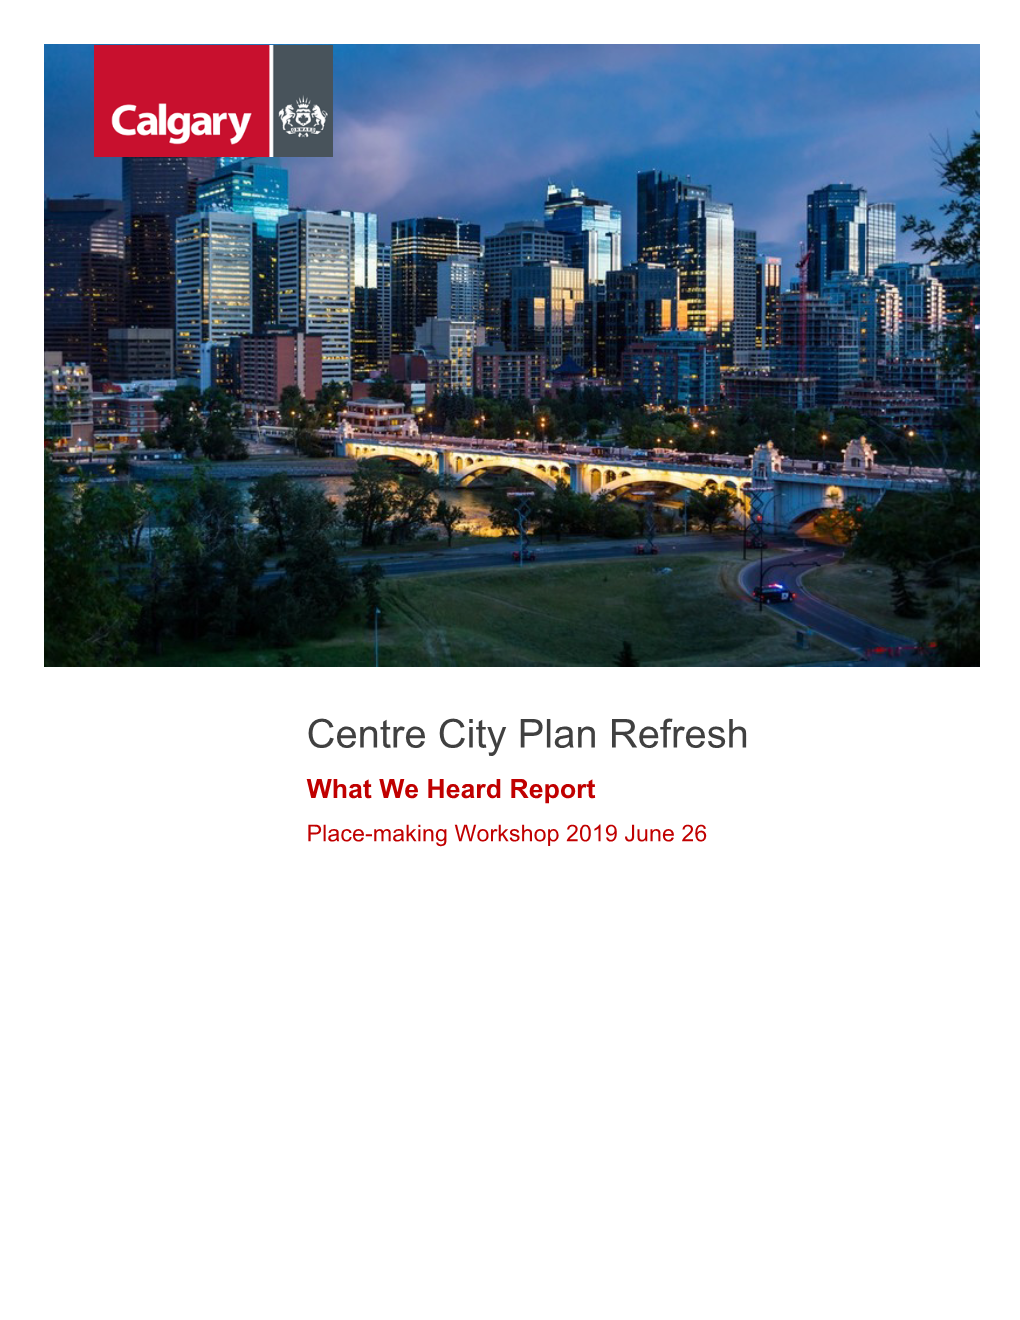 Centre City Plan Refresh What We Heard Report Place-Making Workshop 2019 June 26